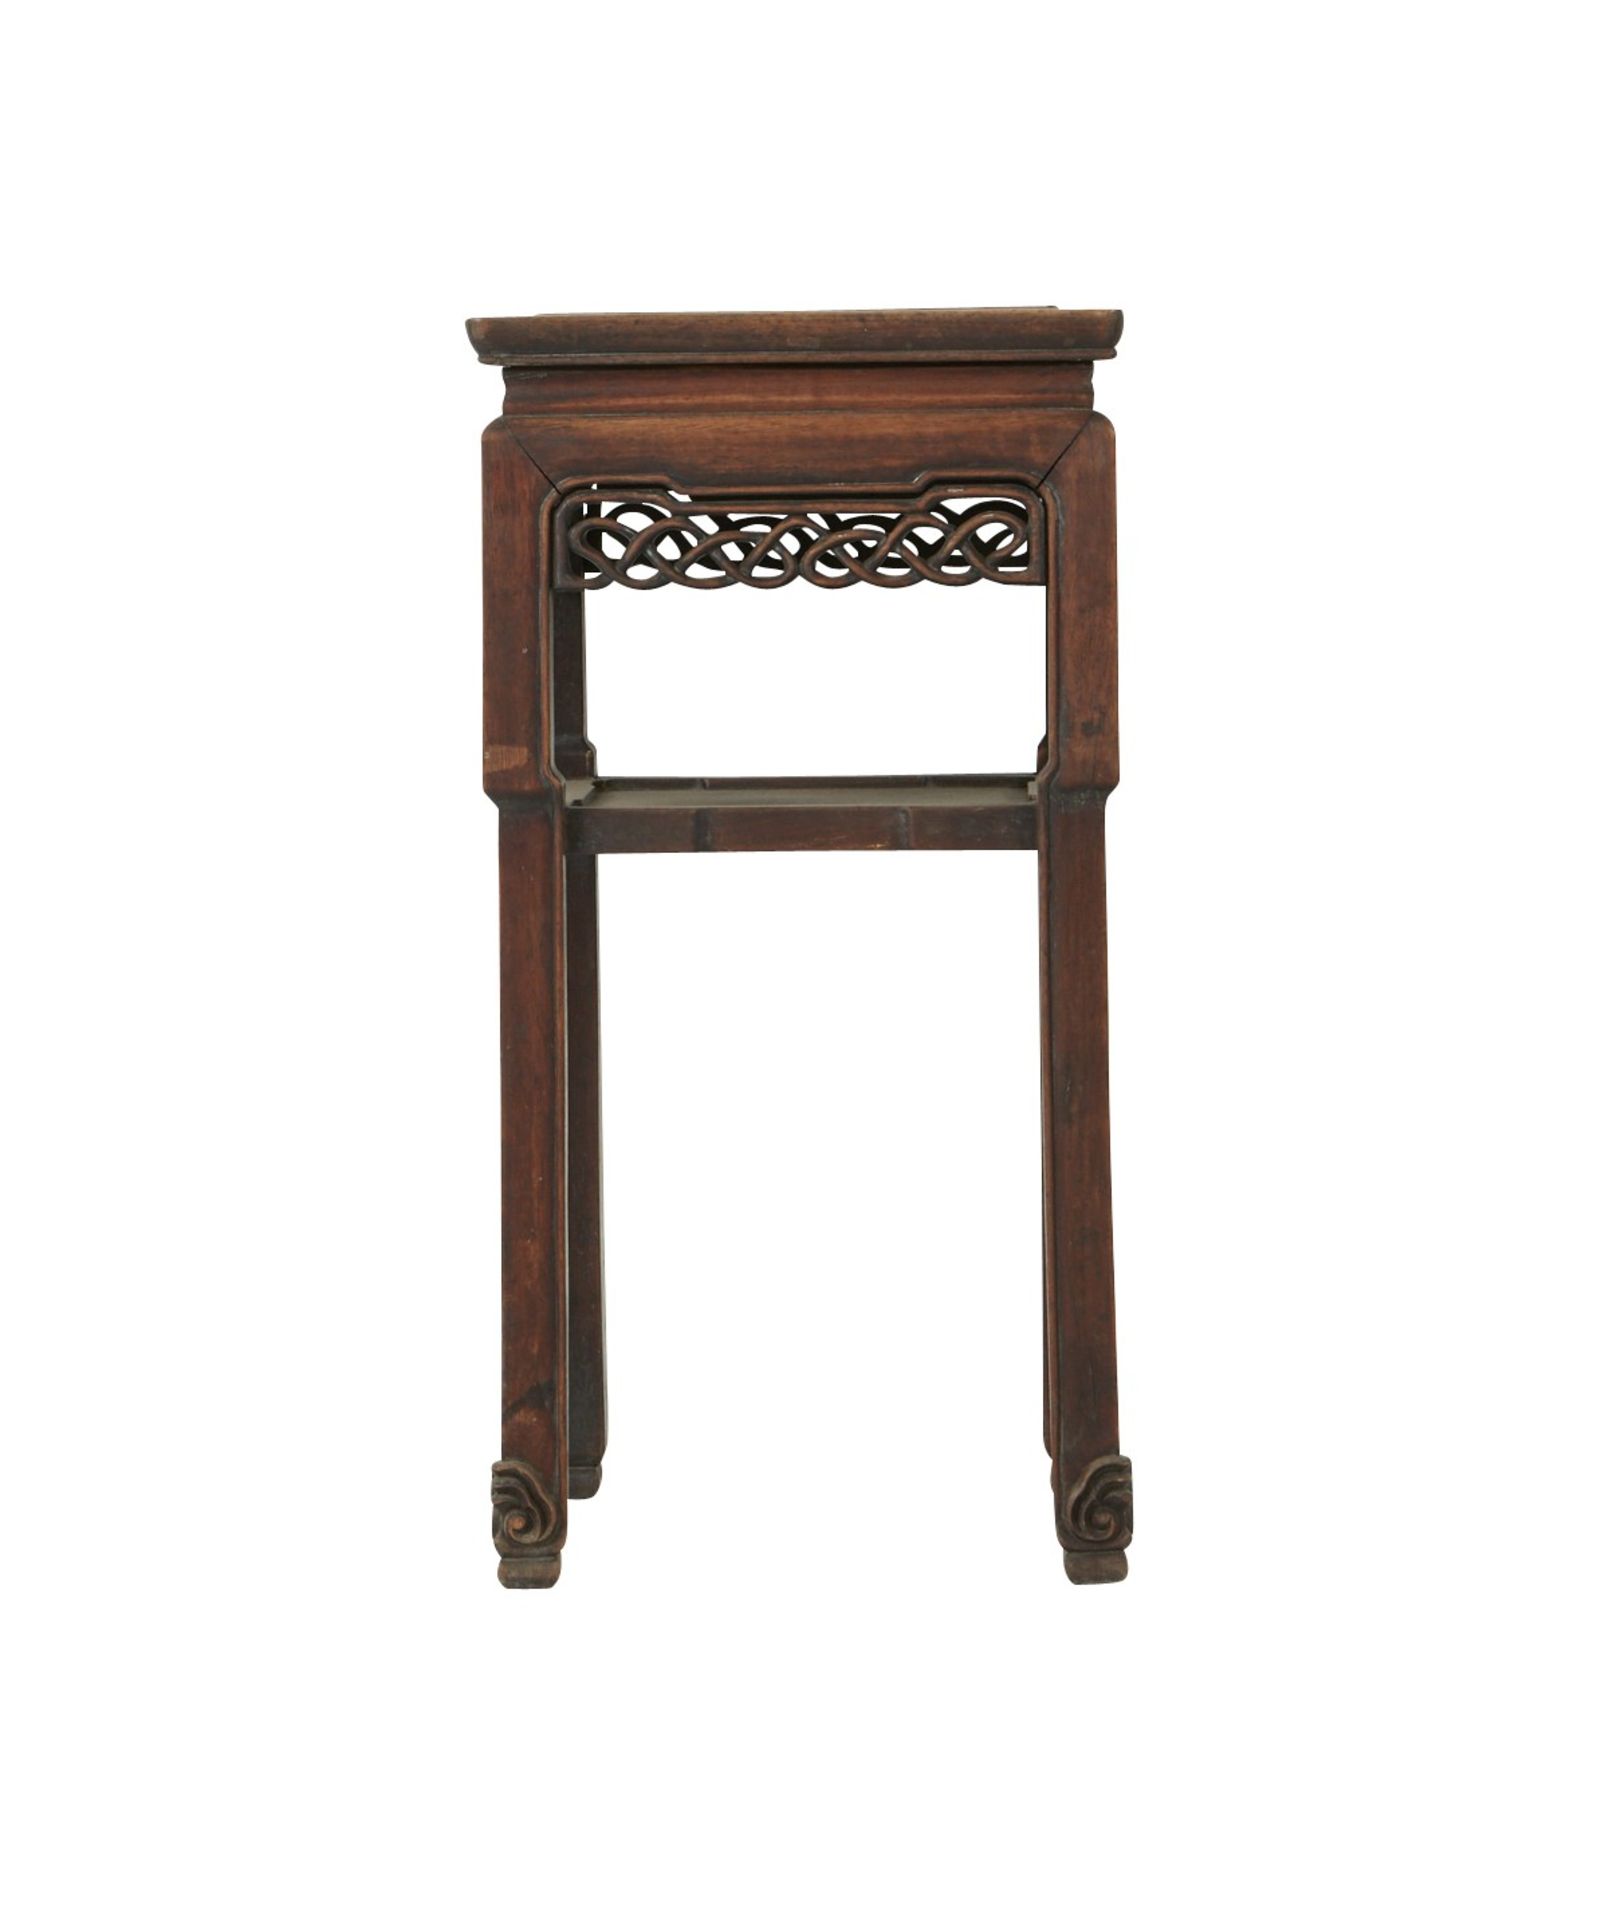 19th c. Chinese Rosewood Stand w/ Carved Skirt - Image 4 of 8